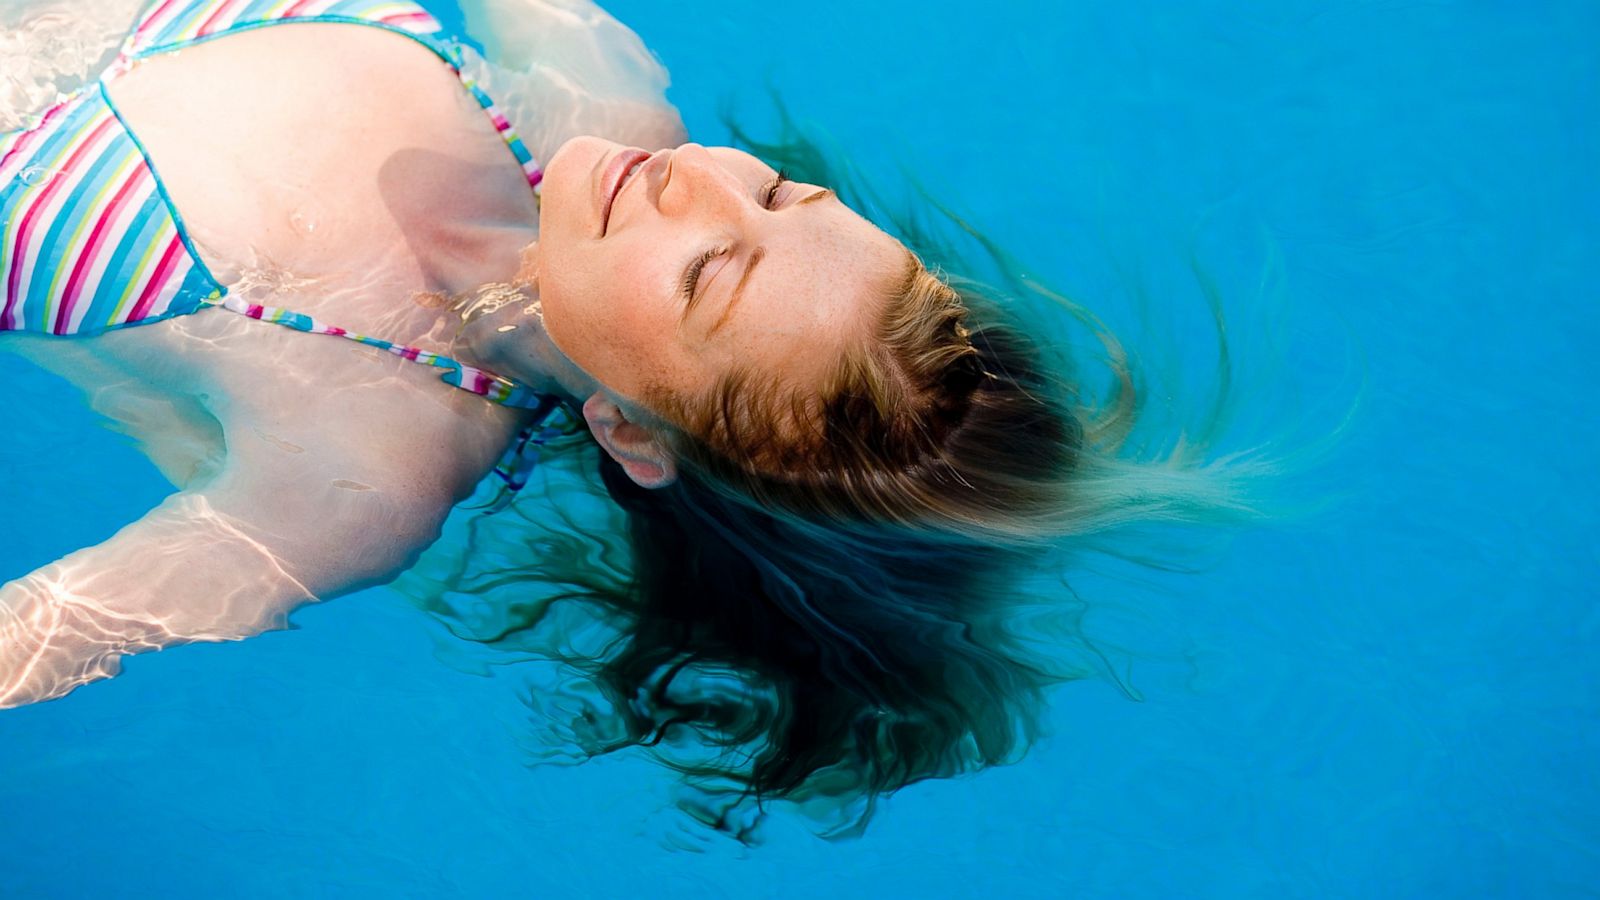 How to Keep Chlorine From Wrecking Your Hair, Skin and Swimsuit - ABC News